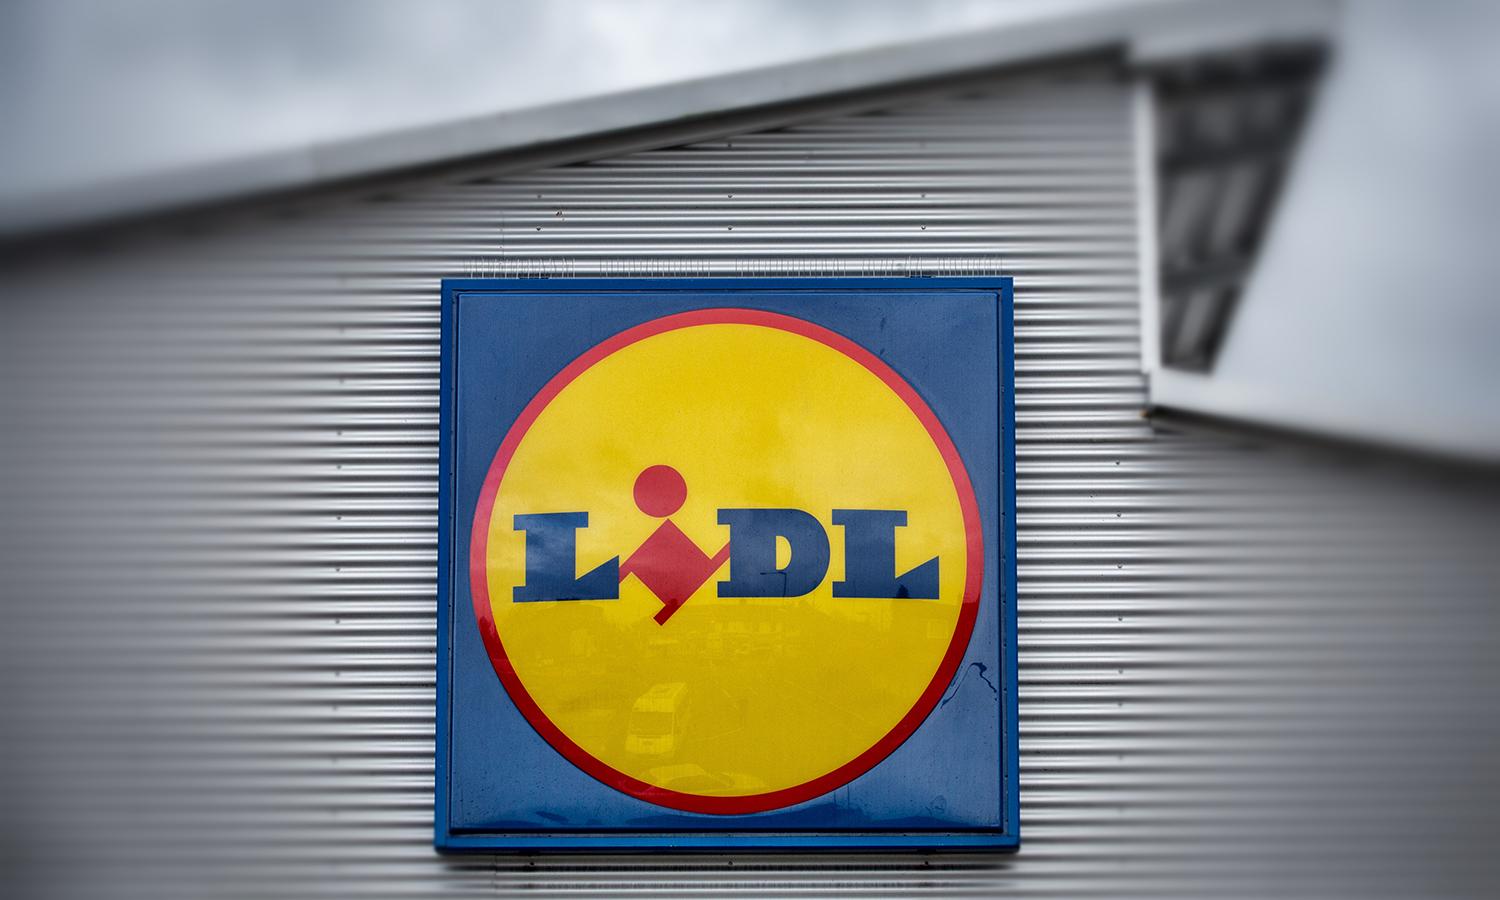 The Lidl sign is displayed outside a branch of the supermarket on Nov. 18, 2015, in Bristol, England. (Photo by Matt Cardy/Getty Images)